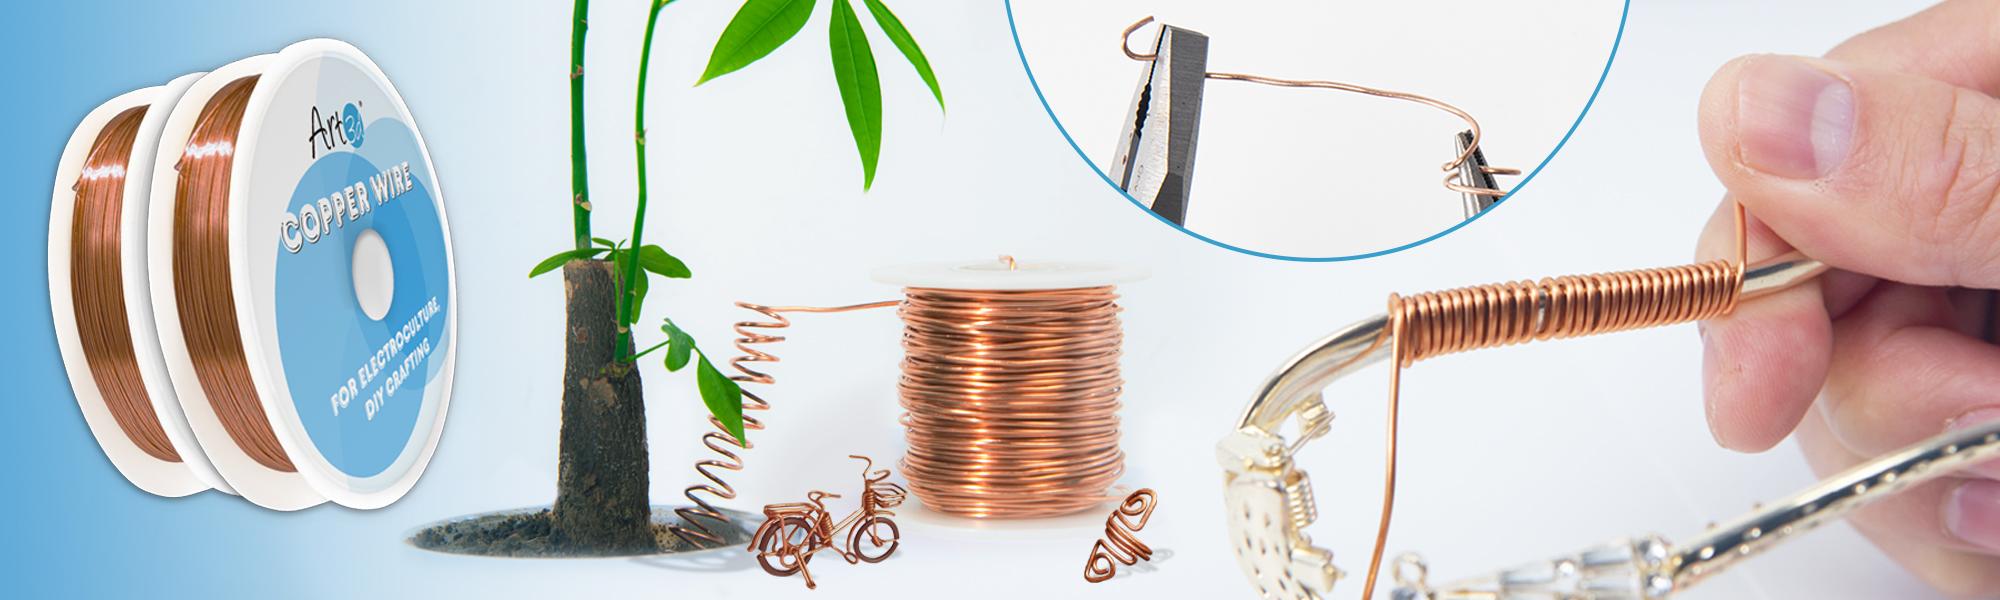 Bend, Shape, Create with Our Premium Copper Wire